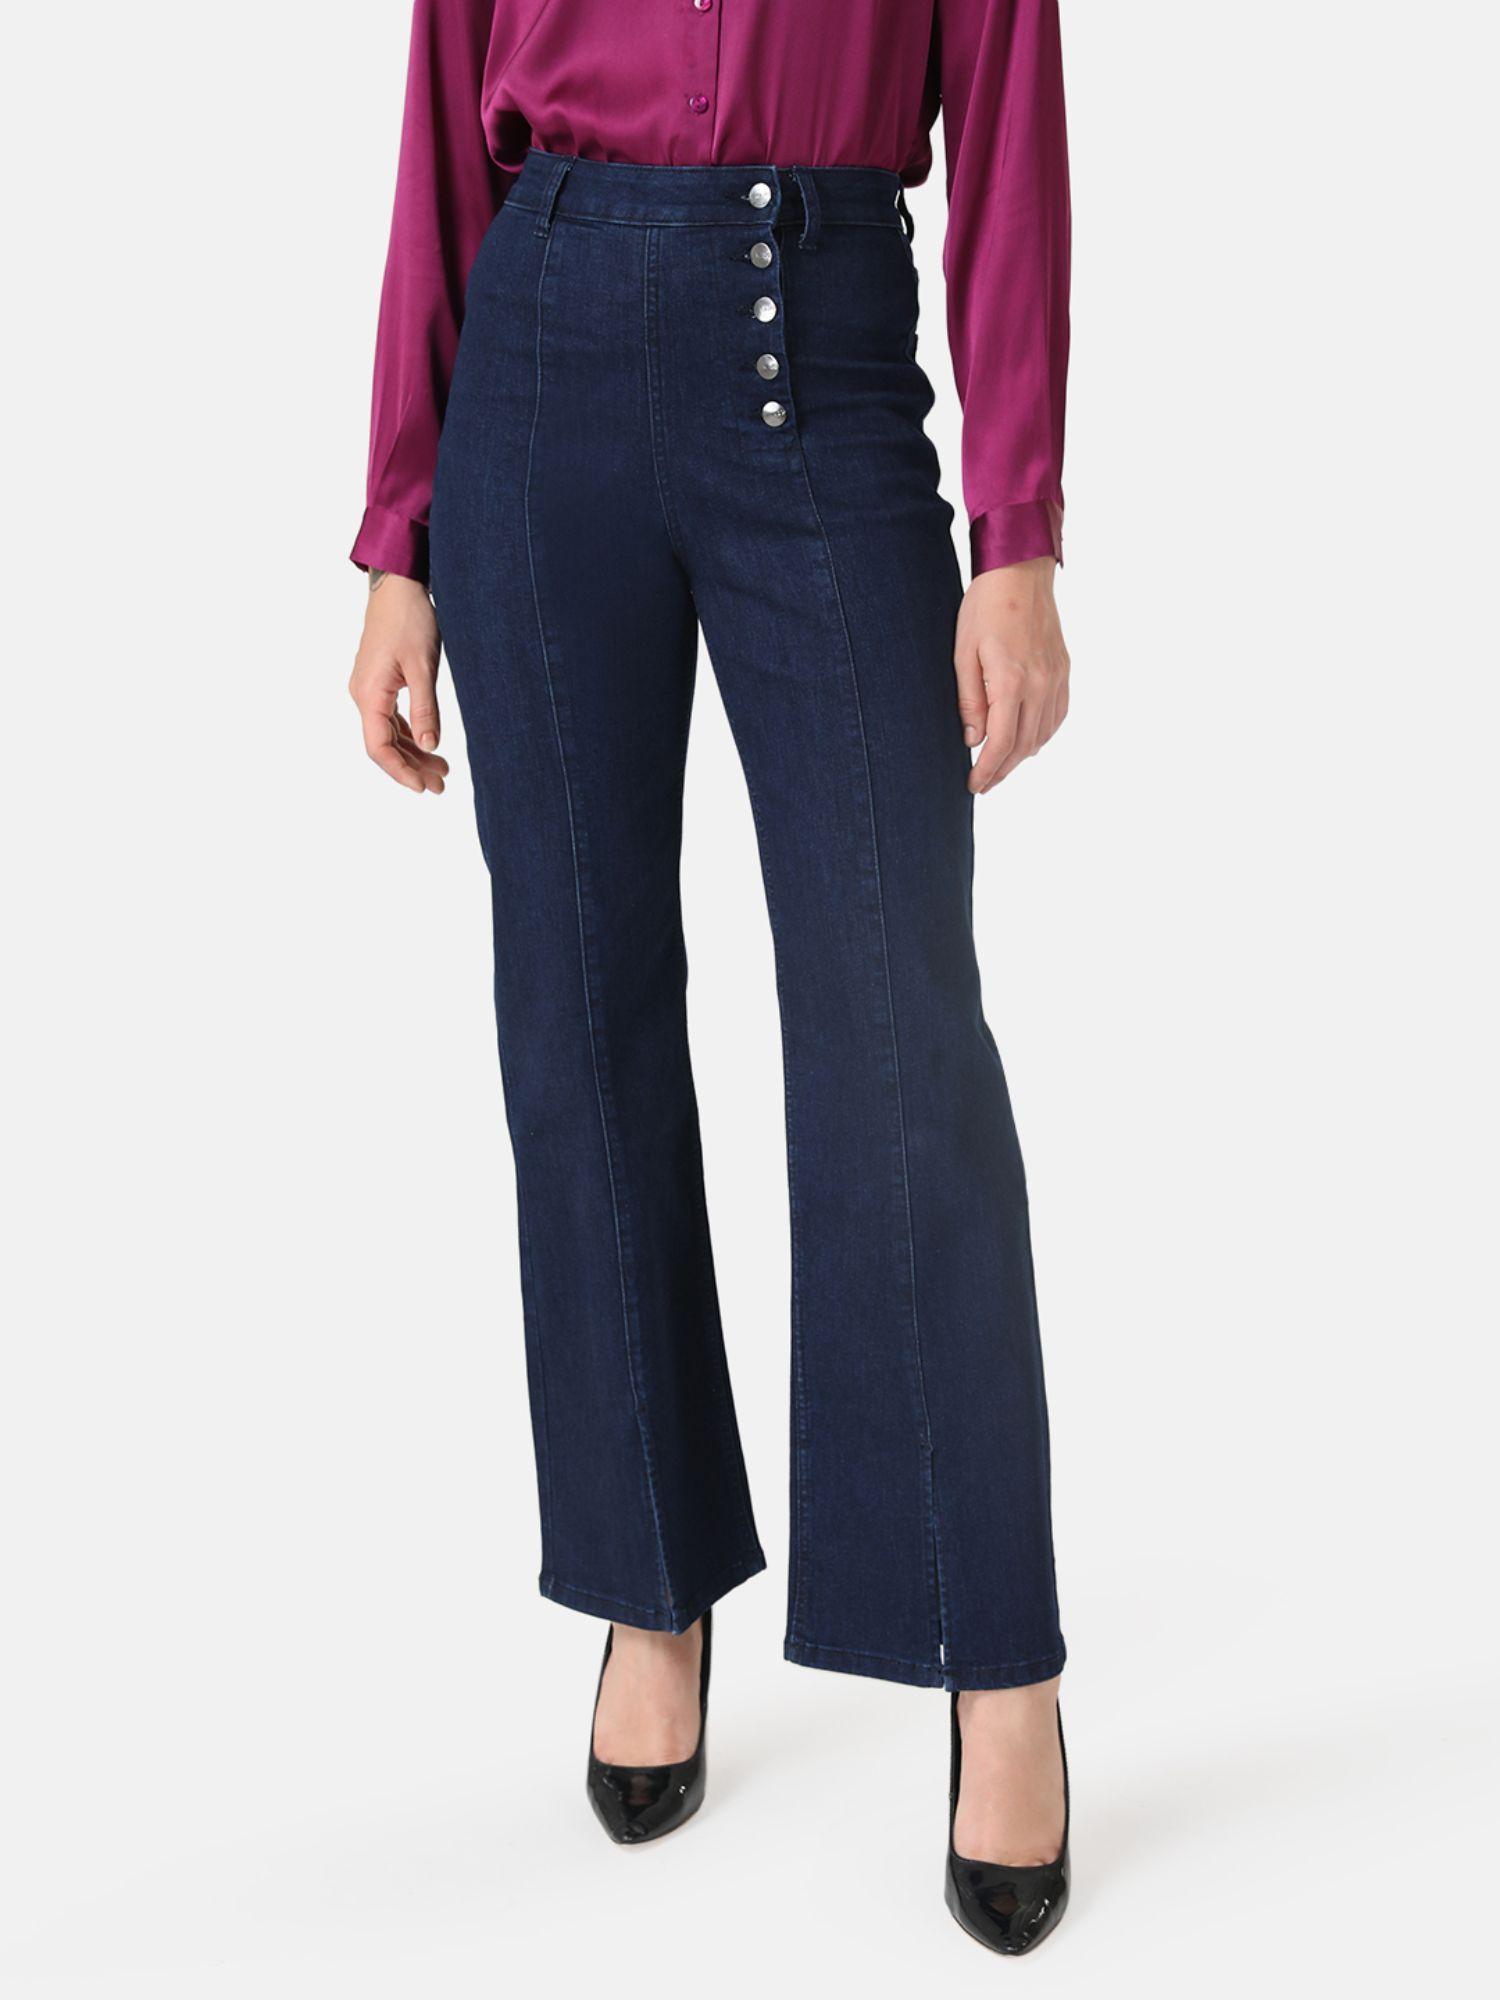 navy blue jeans with side buttons